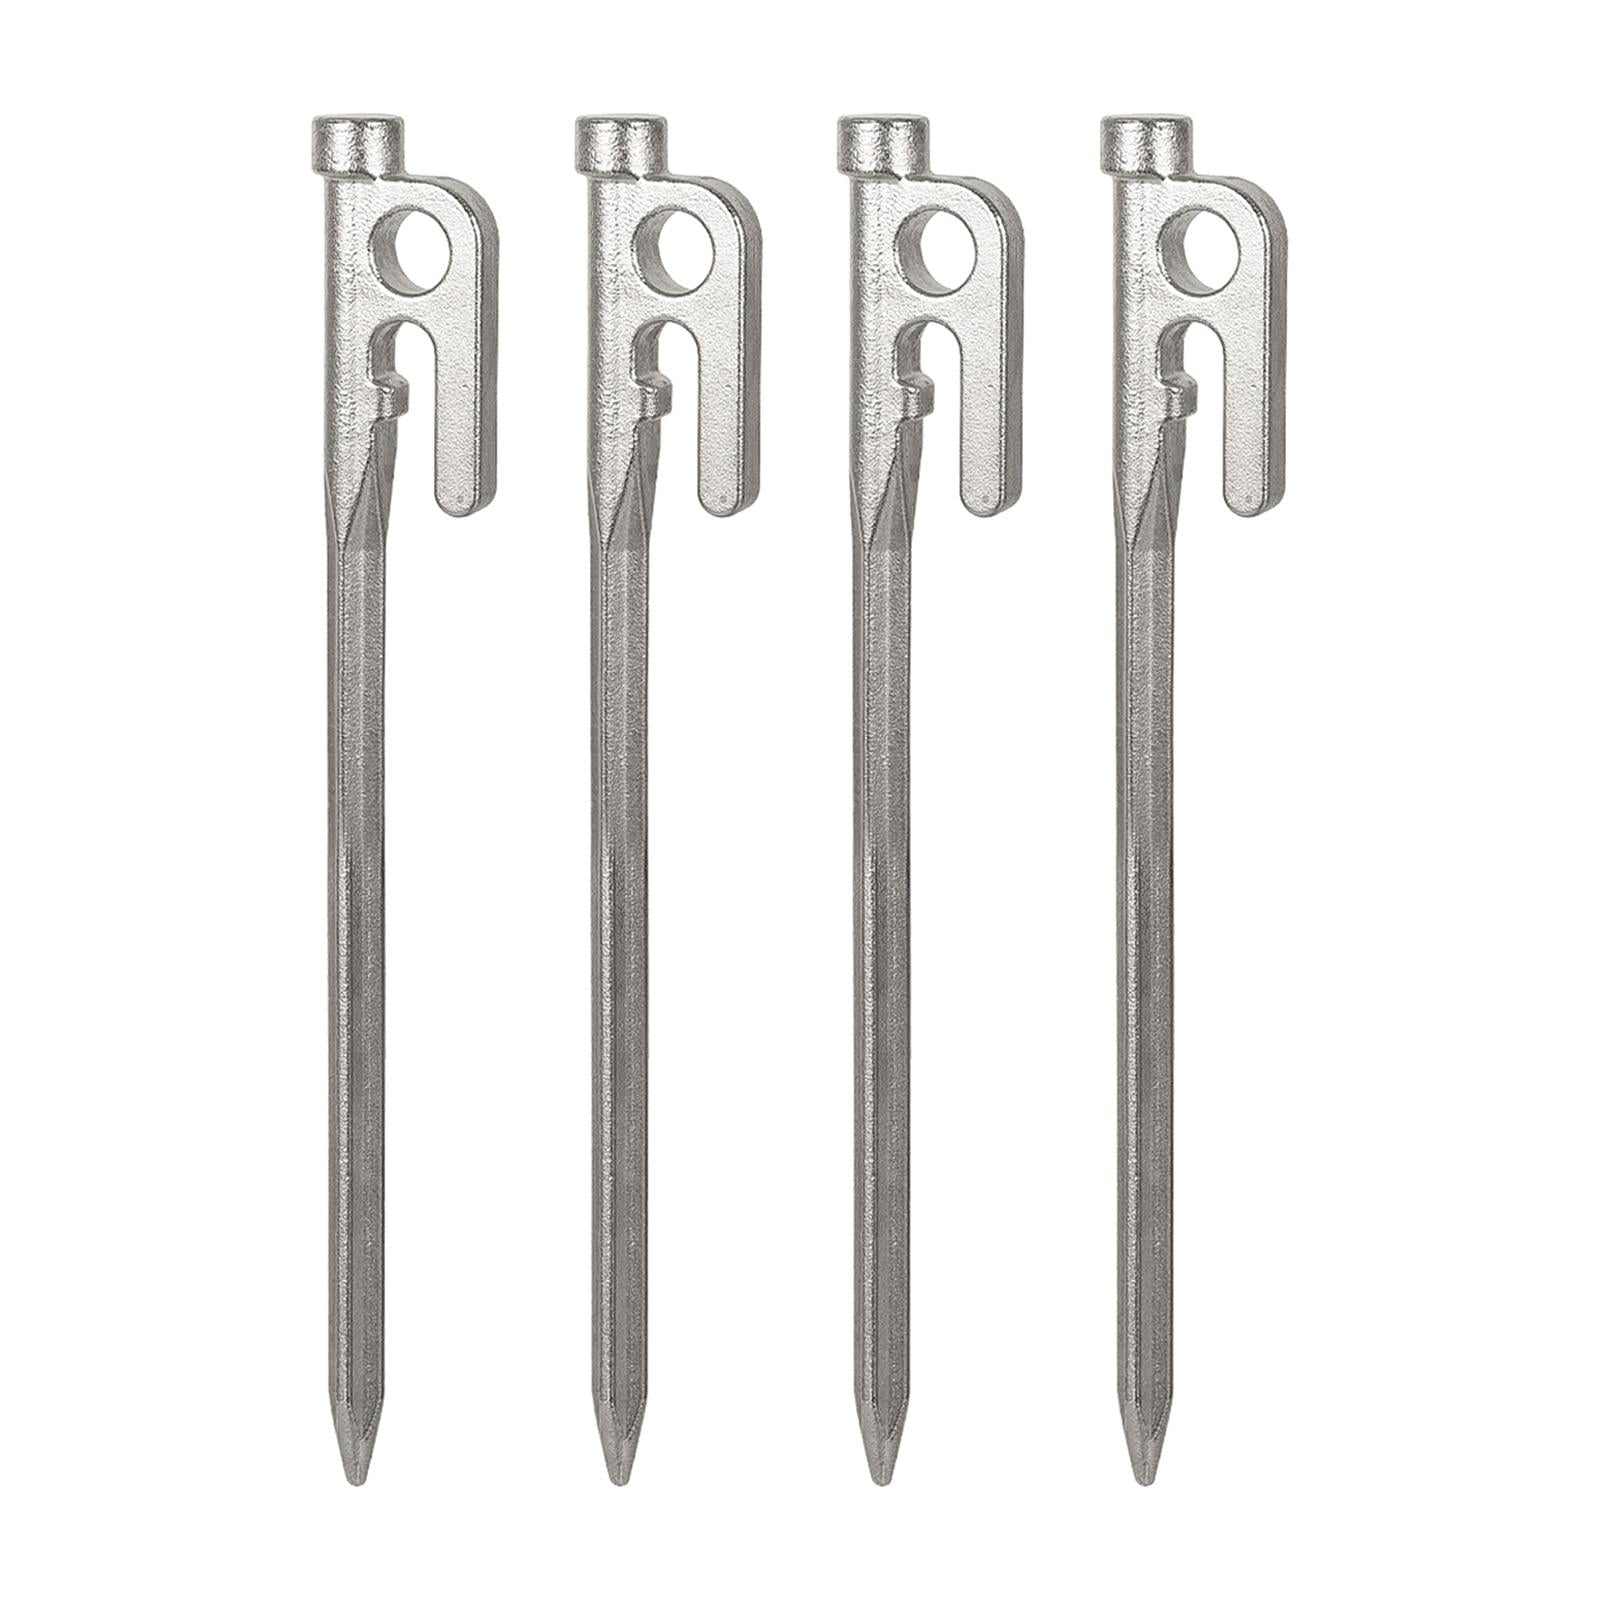 Forged Steel Tent Pegs - Small (1pcs) 20cm, Tent Pegs